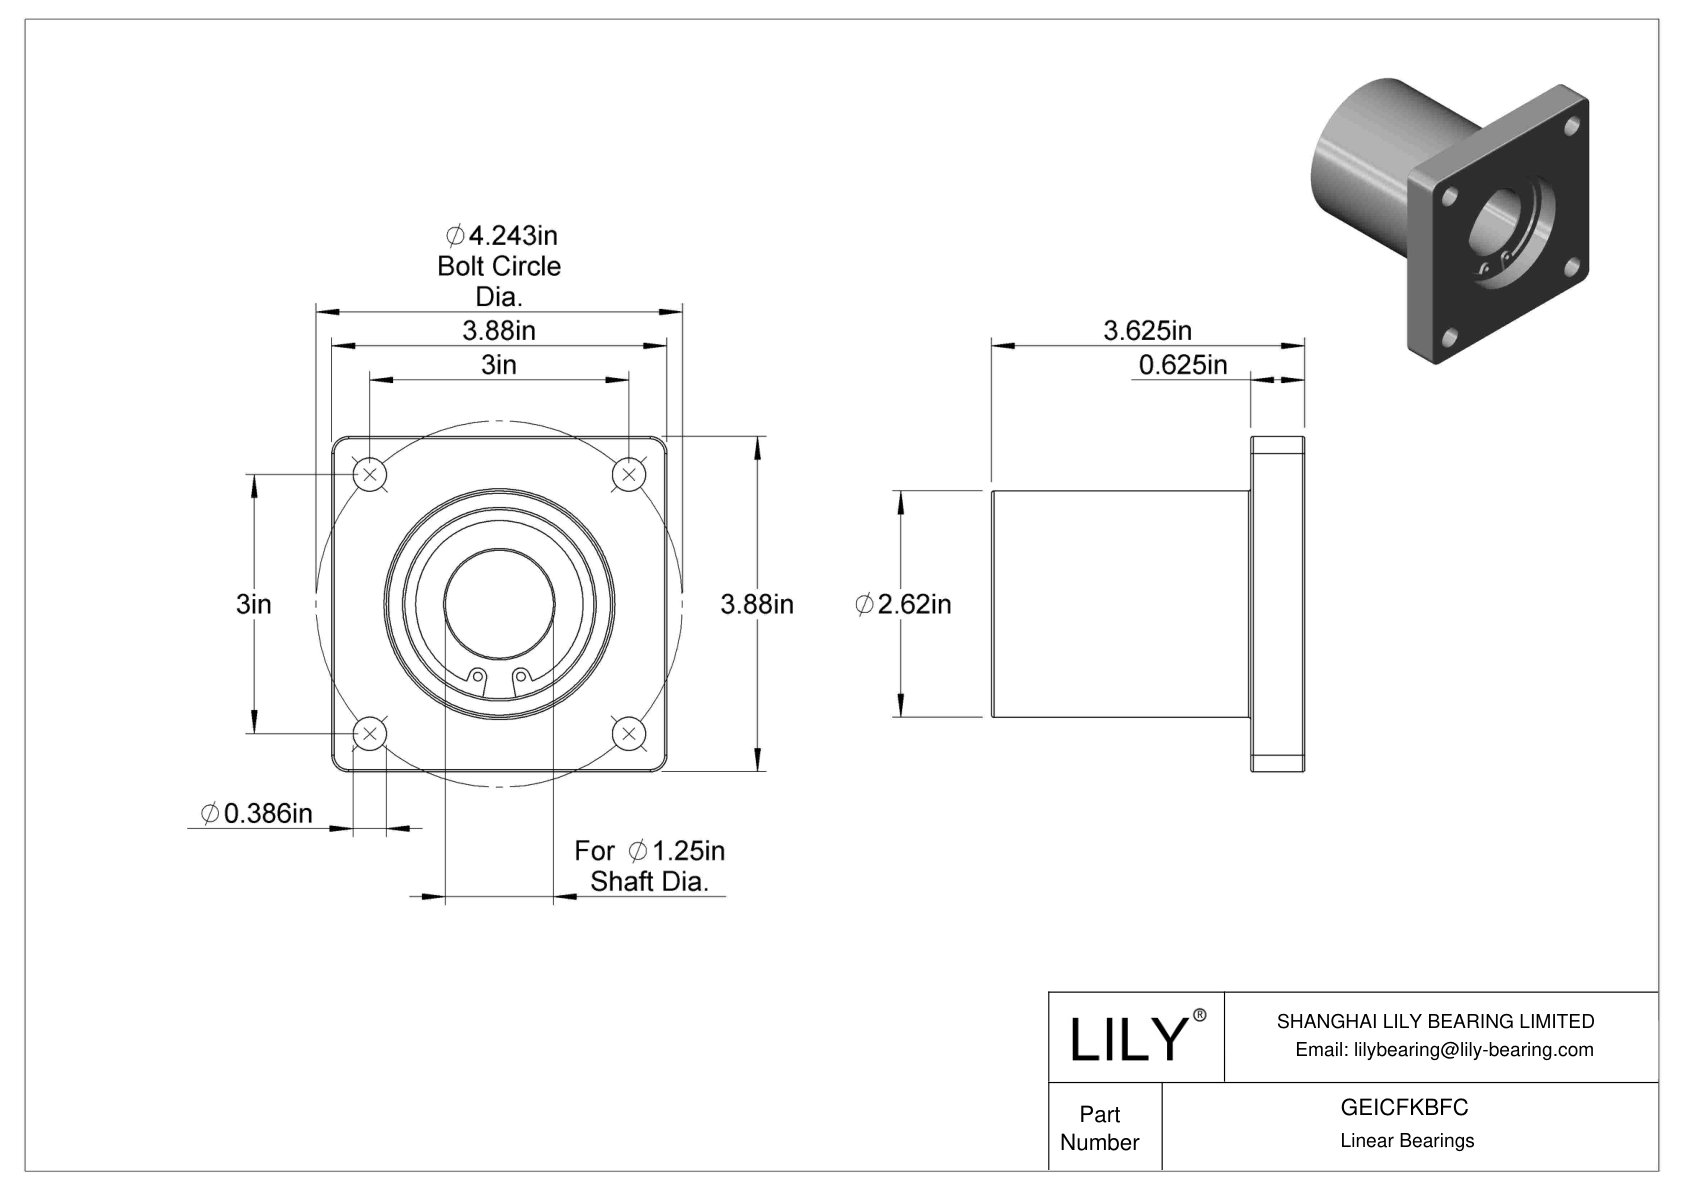 GEICFKBFC Chemical-Resistant Flange-Mounted Linear Sleeve Bearings cad drawing